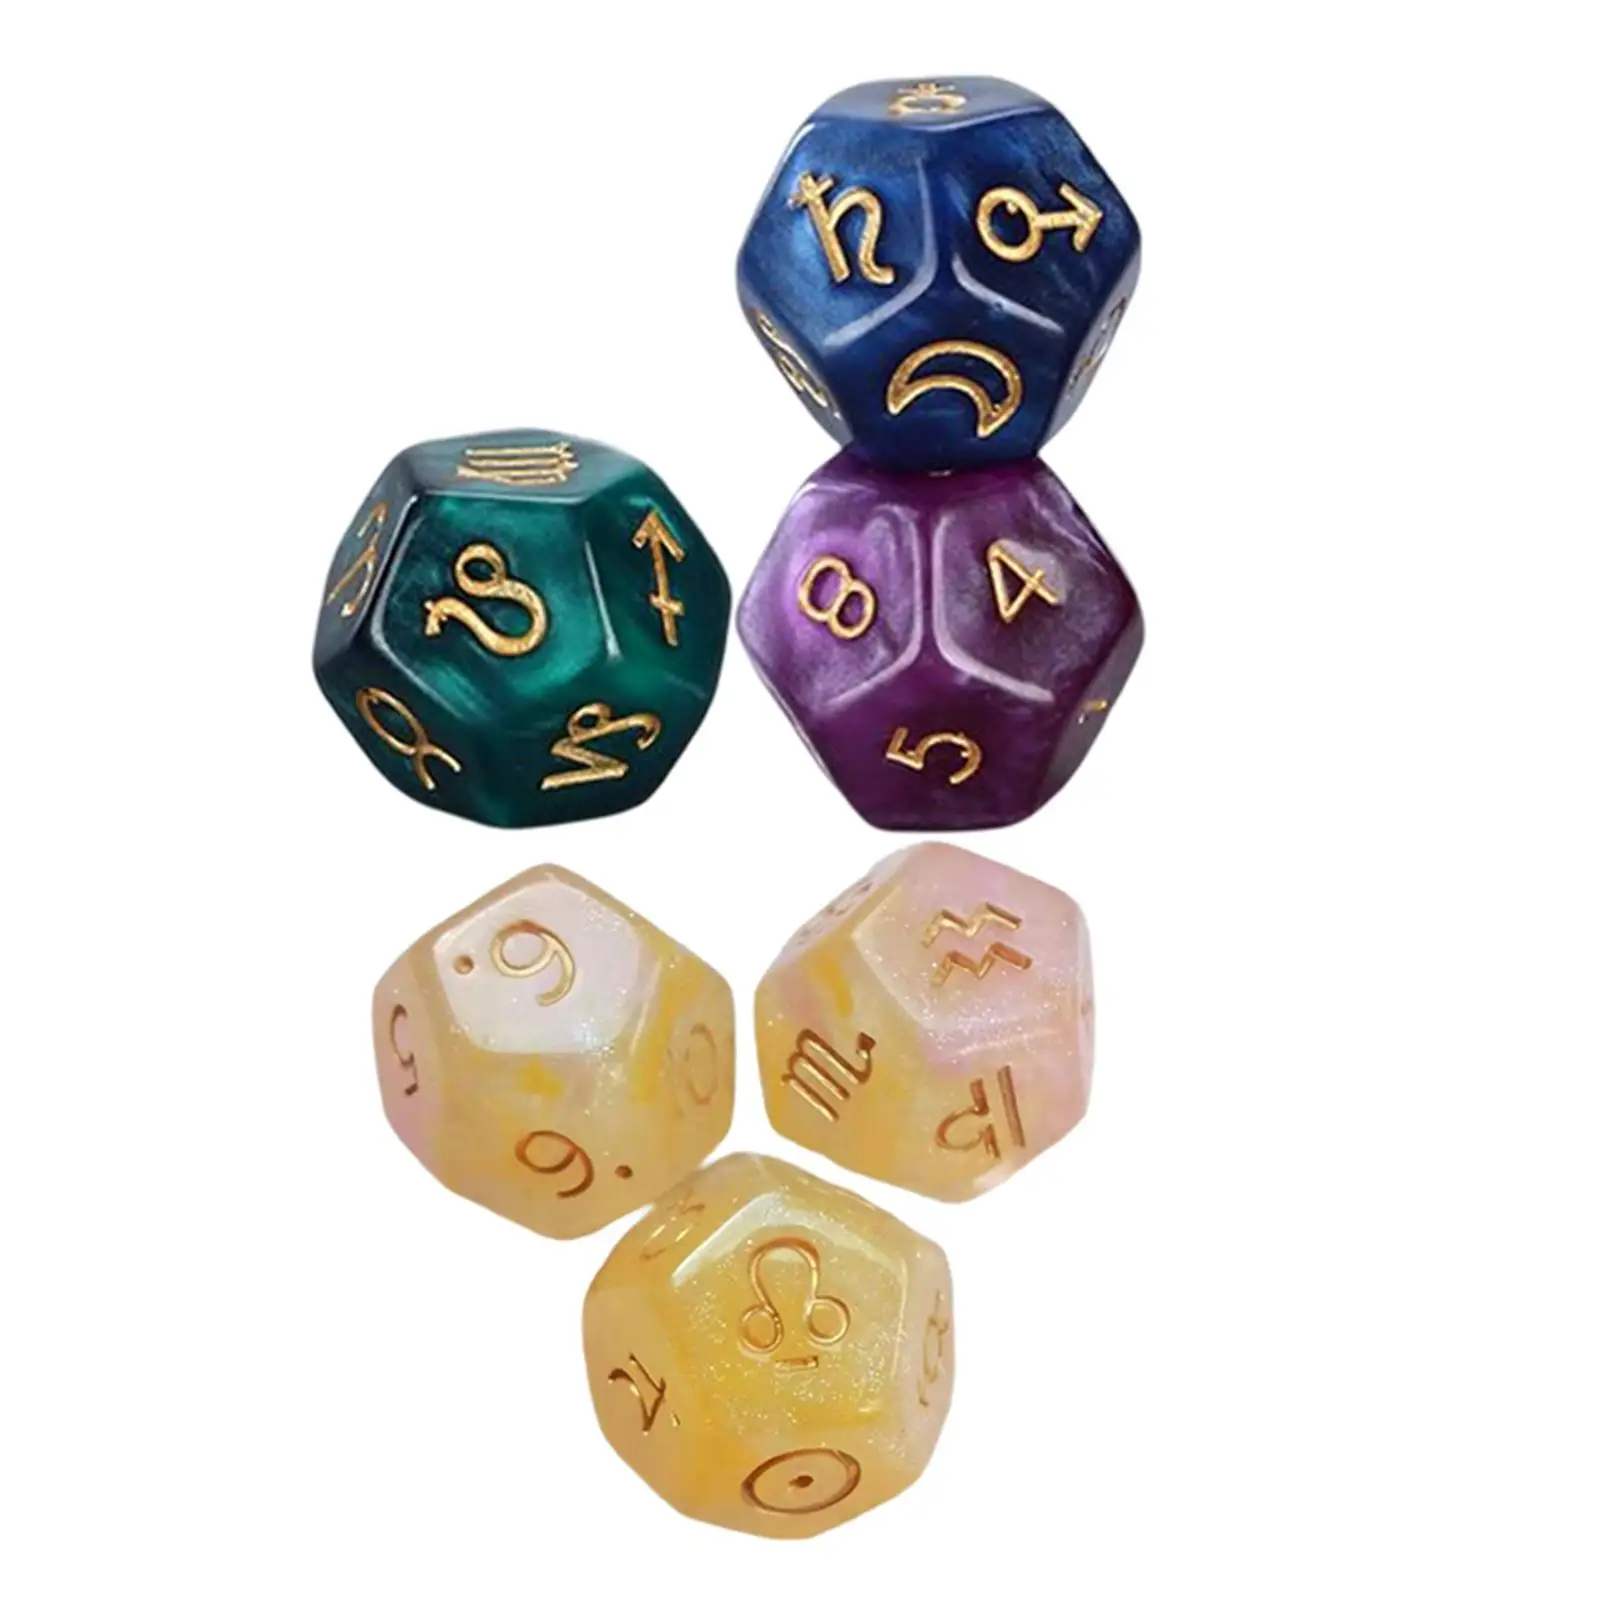 3Pcs 12 Sided Astrology Dice 3PCS Multicolor Resin Zodiac Signs Dice For Constellation Divination Toys Entertainment Board Game